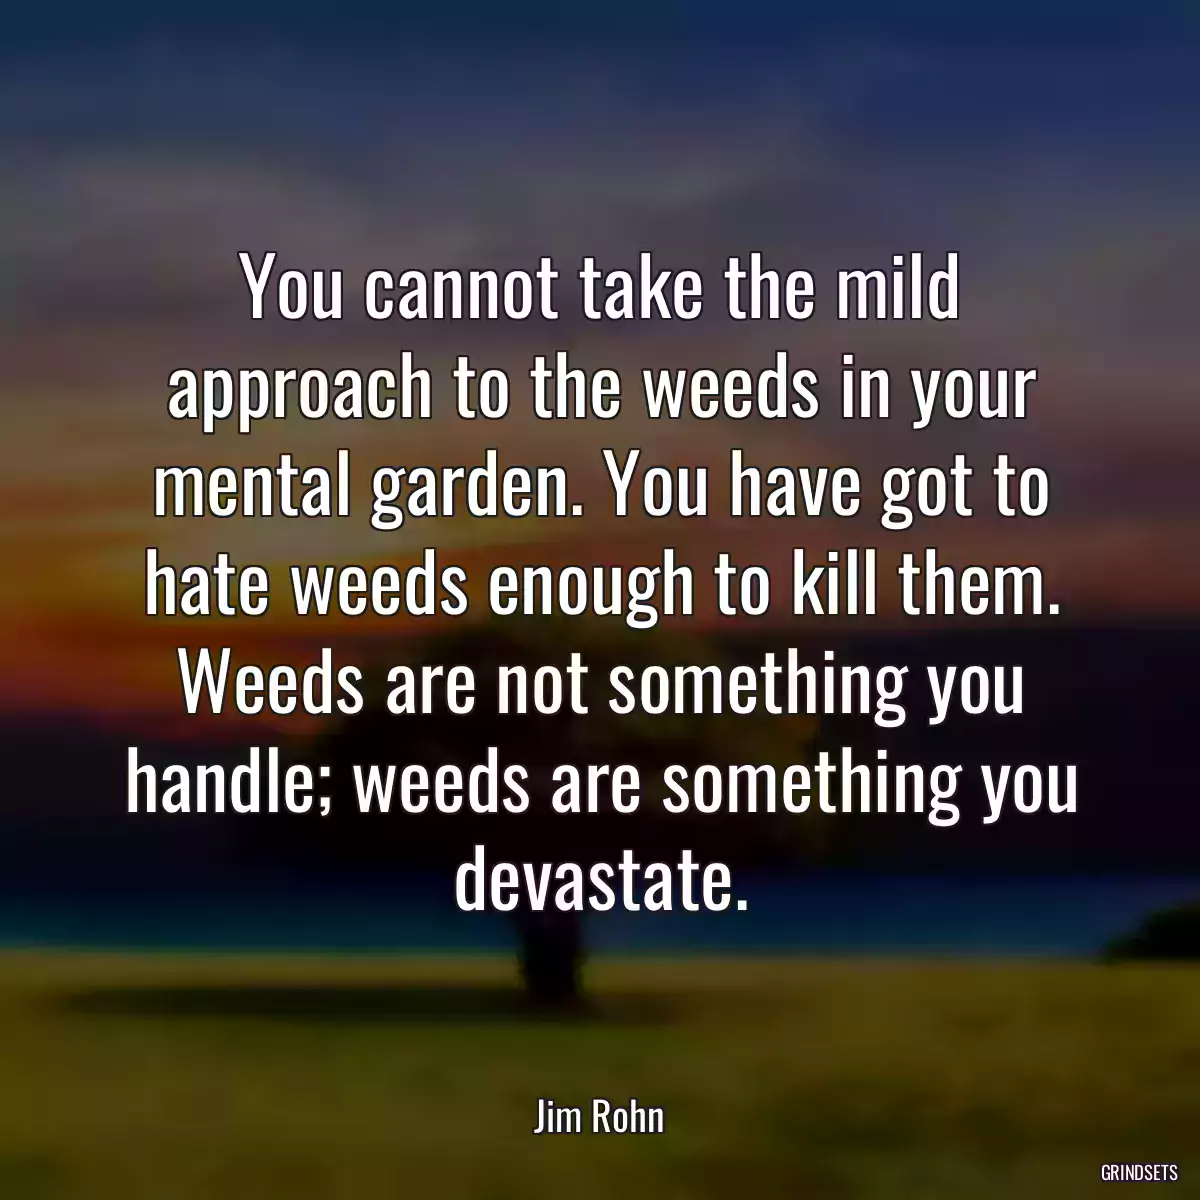 You cannot take the mild approach to the weeds in your mental garden. You have got to hate weeds enough to kill them. Weeds are not something you handle; weeds are something you devastate.